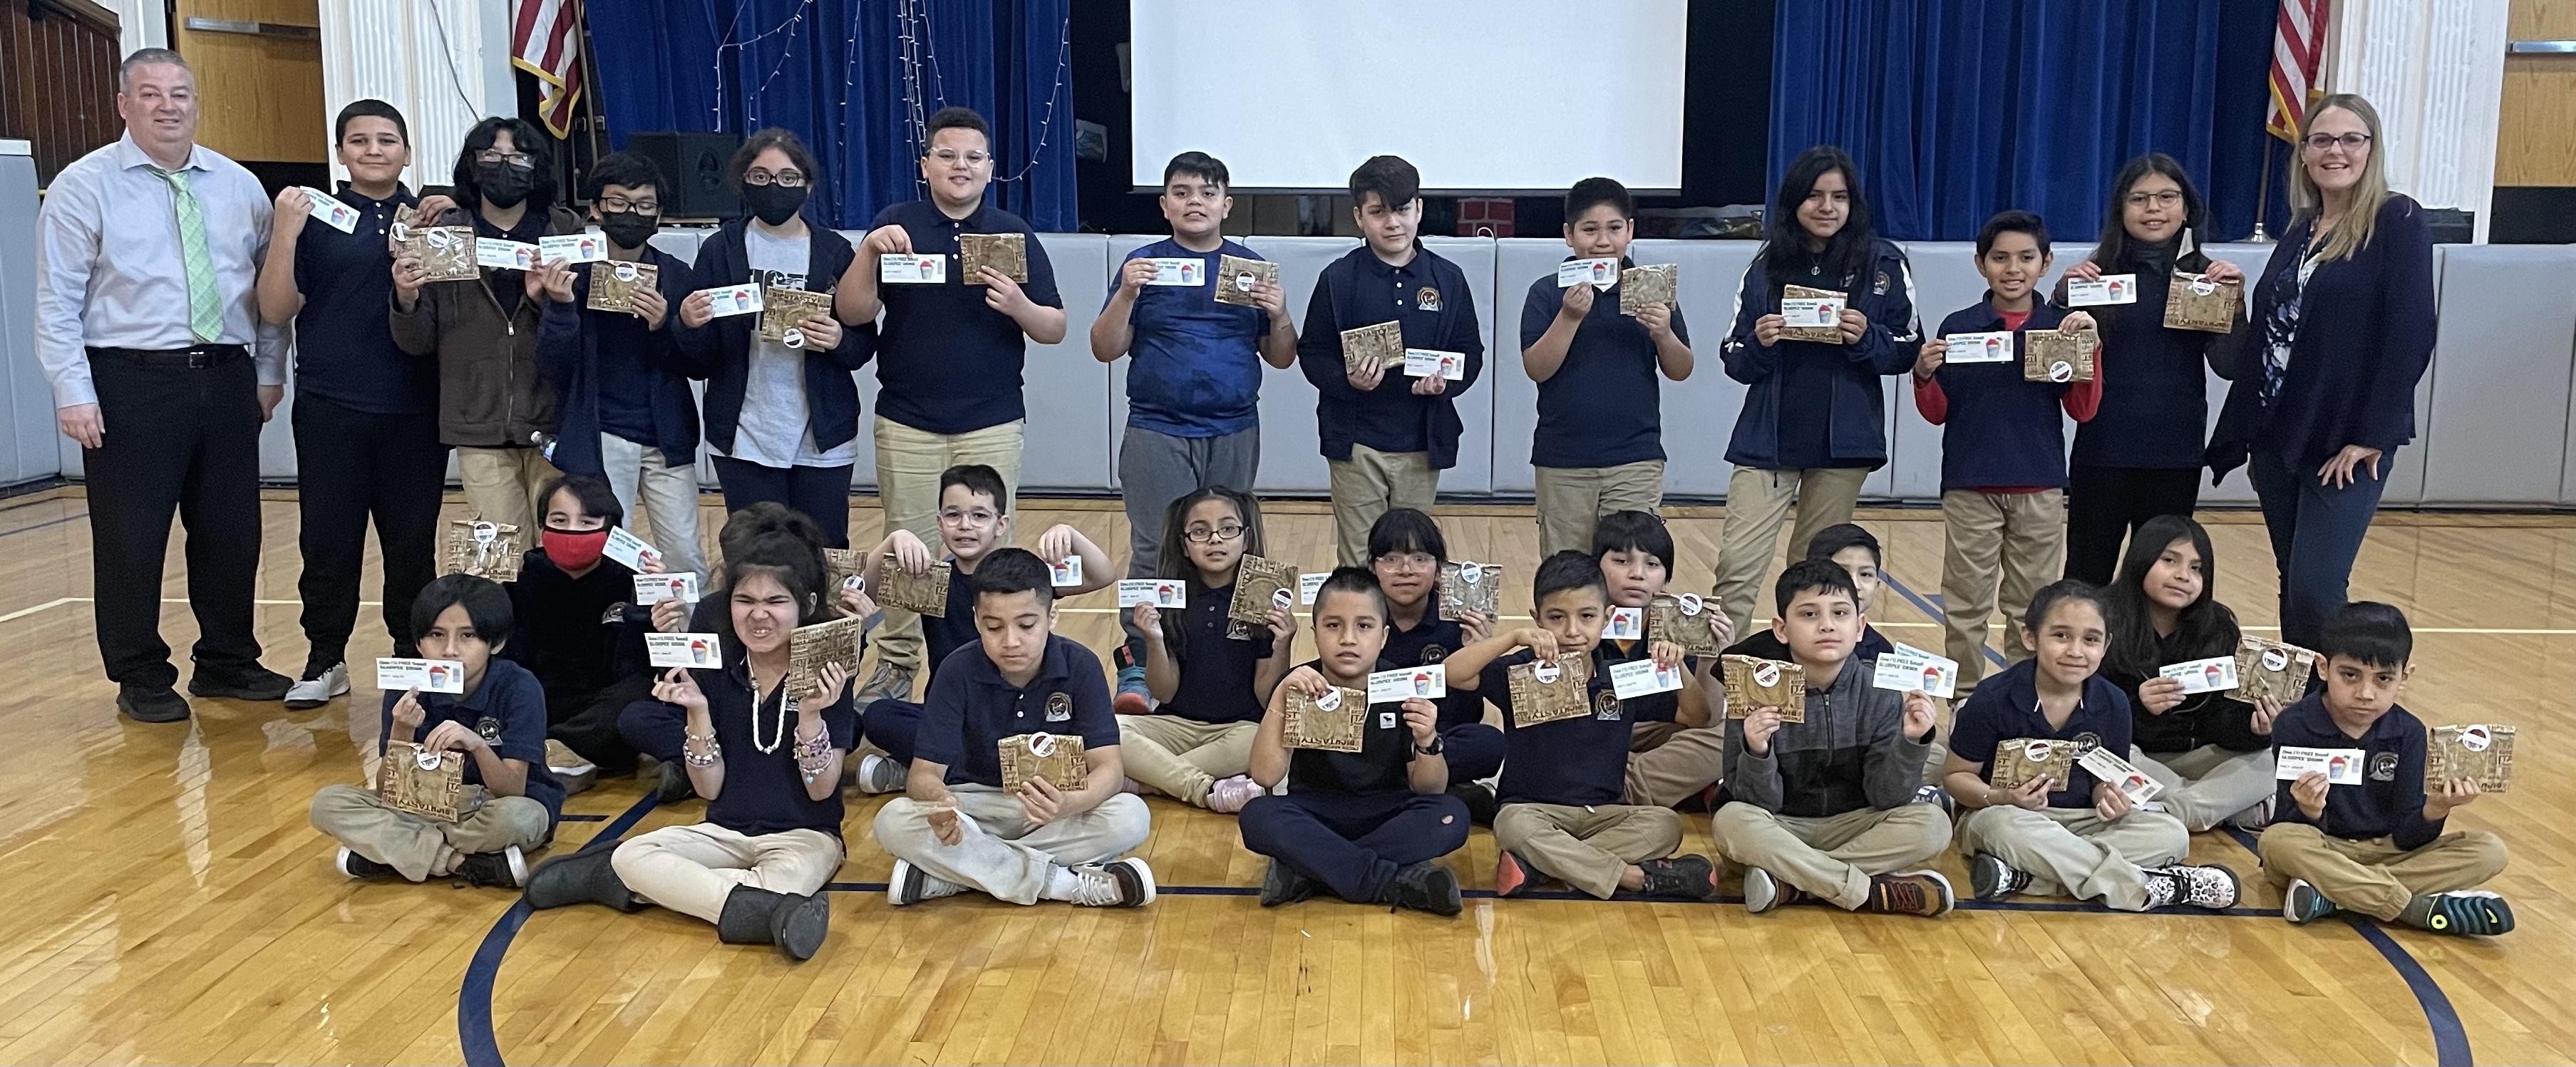 Celebrating Our Multiplication Contest Winners For March at the Washington School